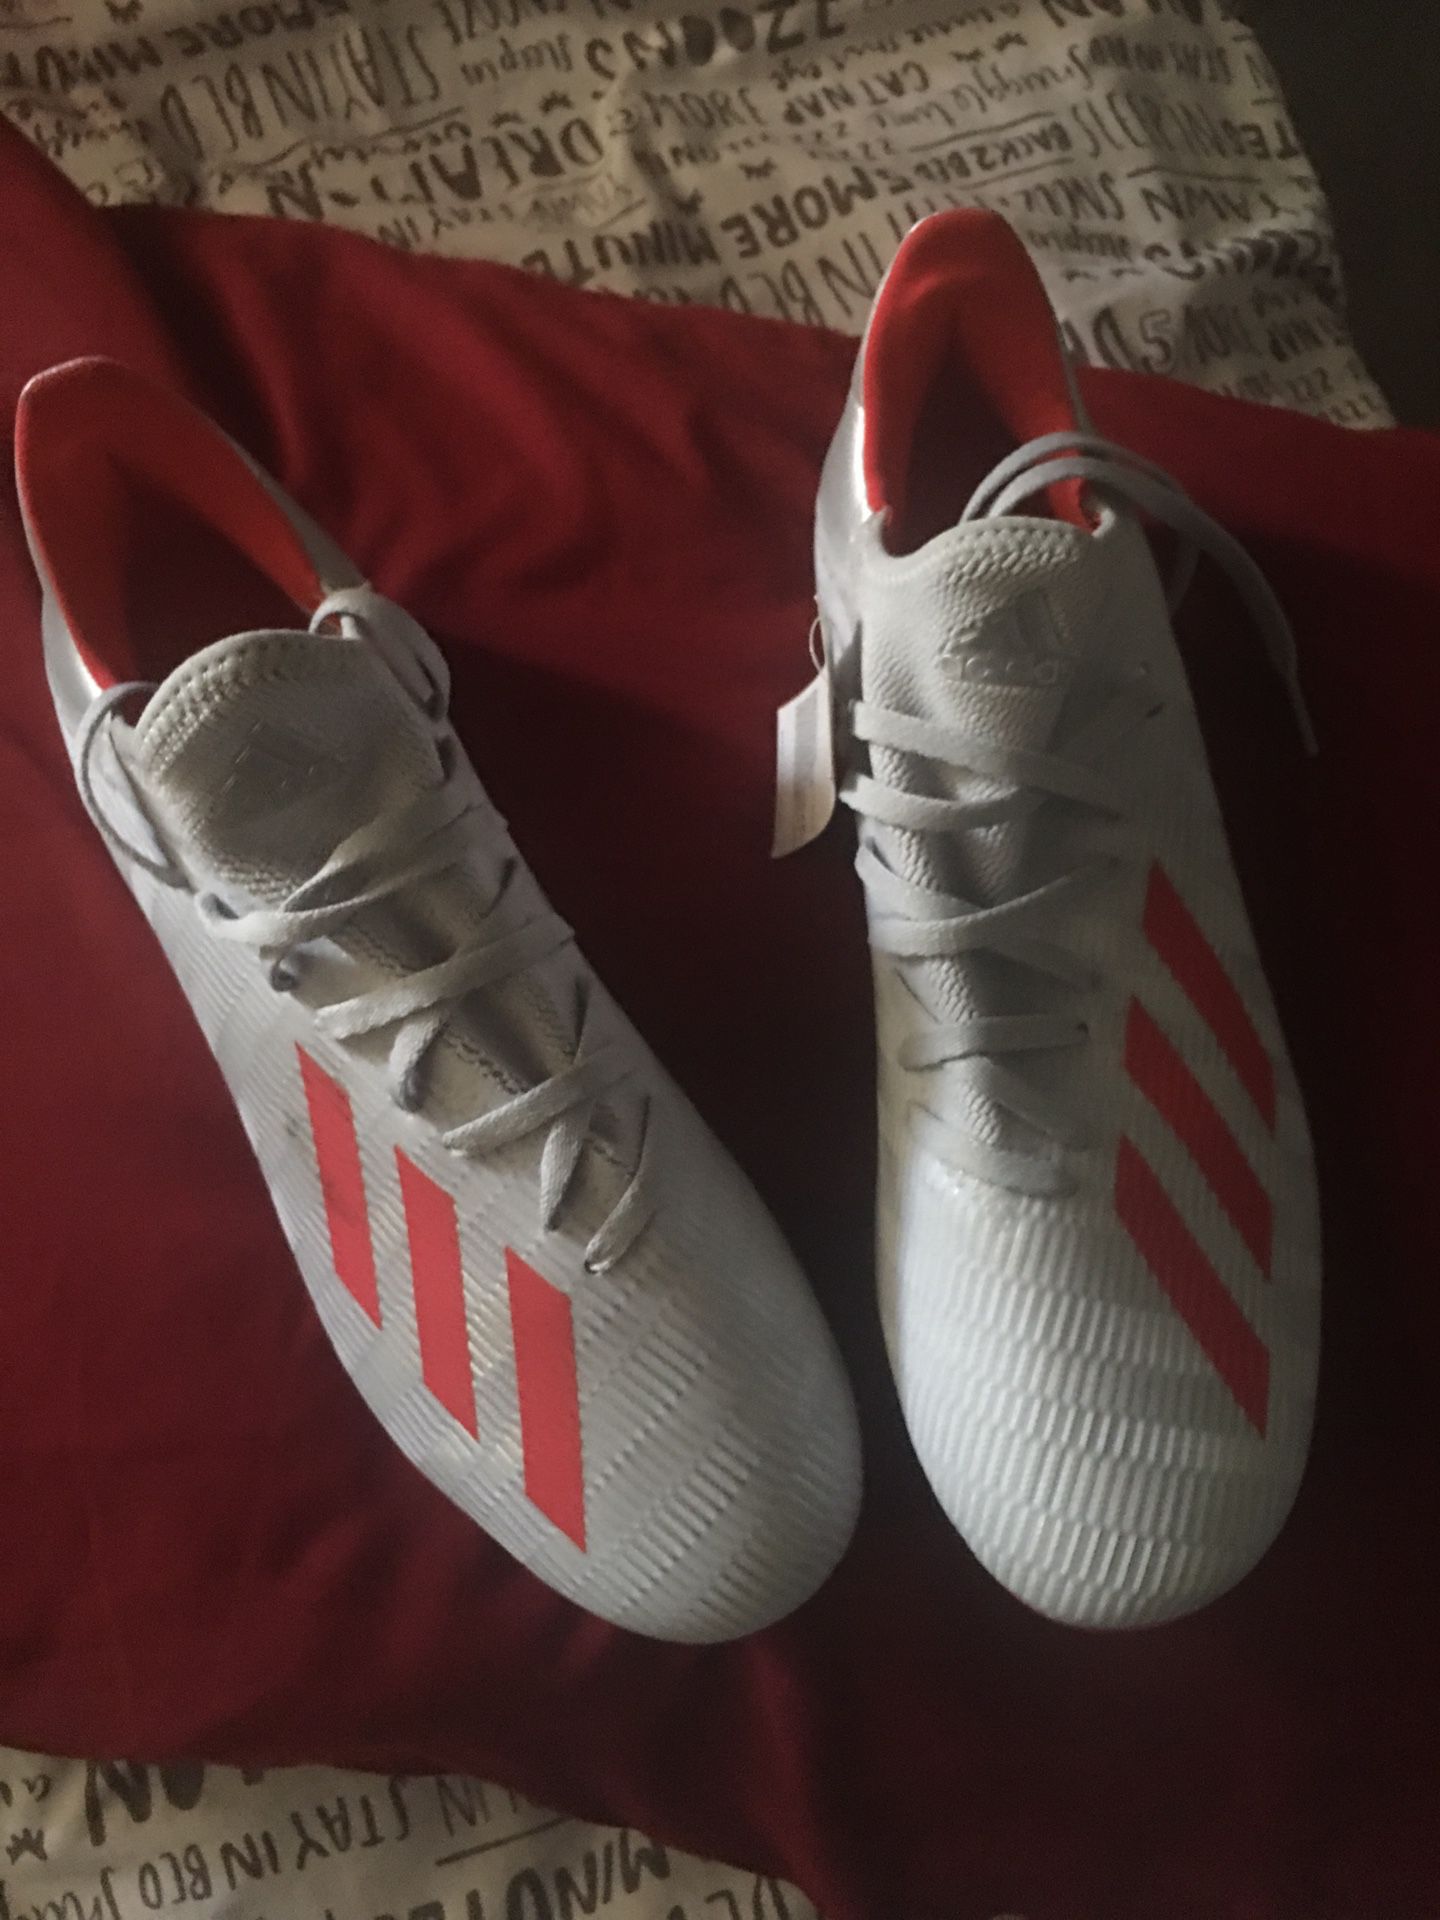 Adidas soccer shoes / size 10 for men’s